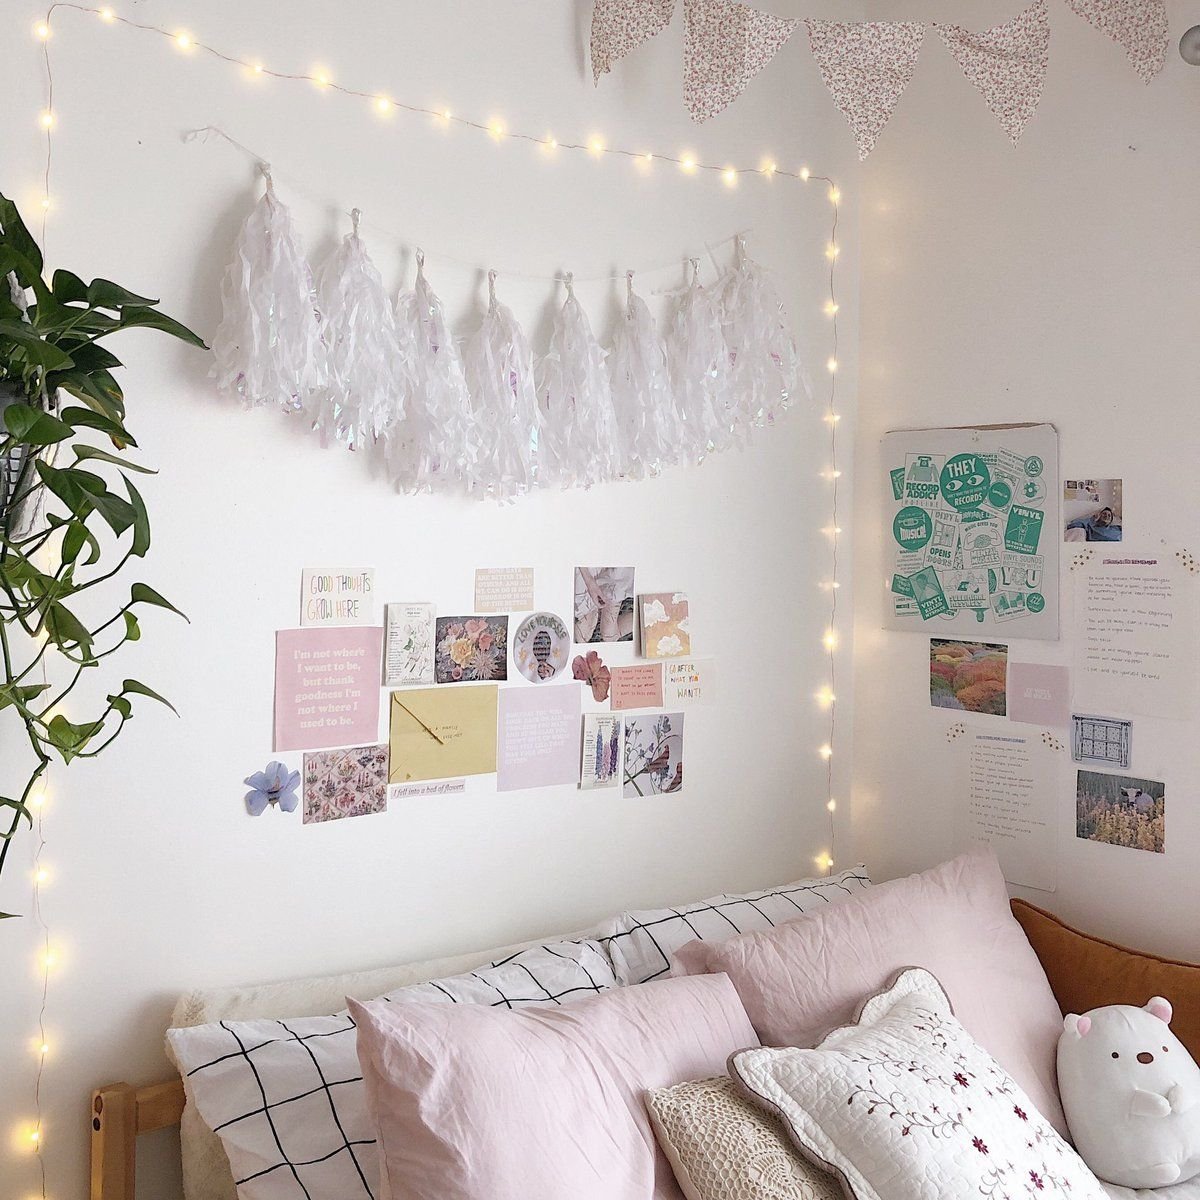 Get the look: pastel aesthetic room decor ideas